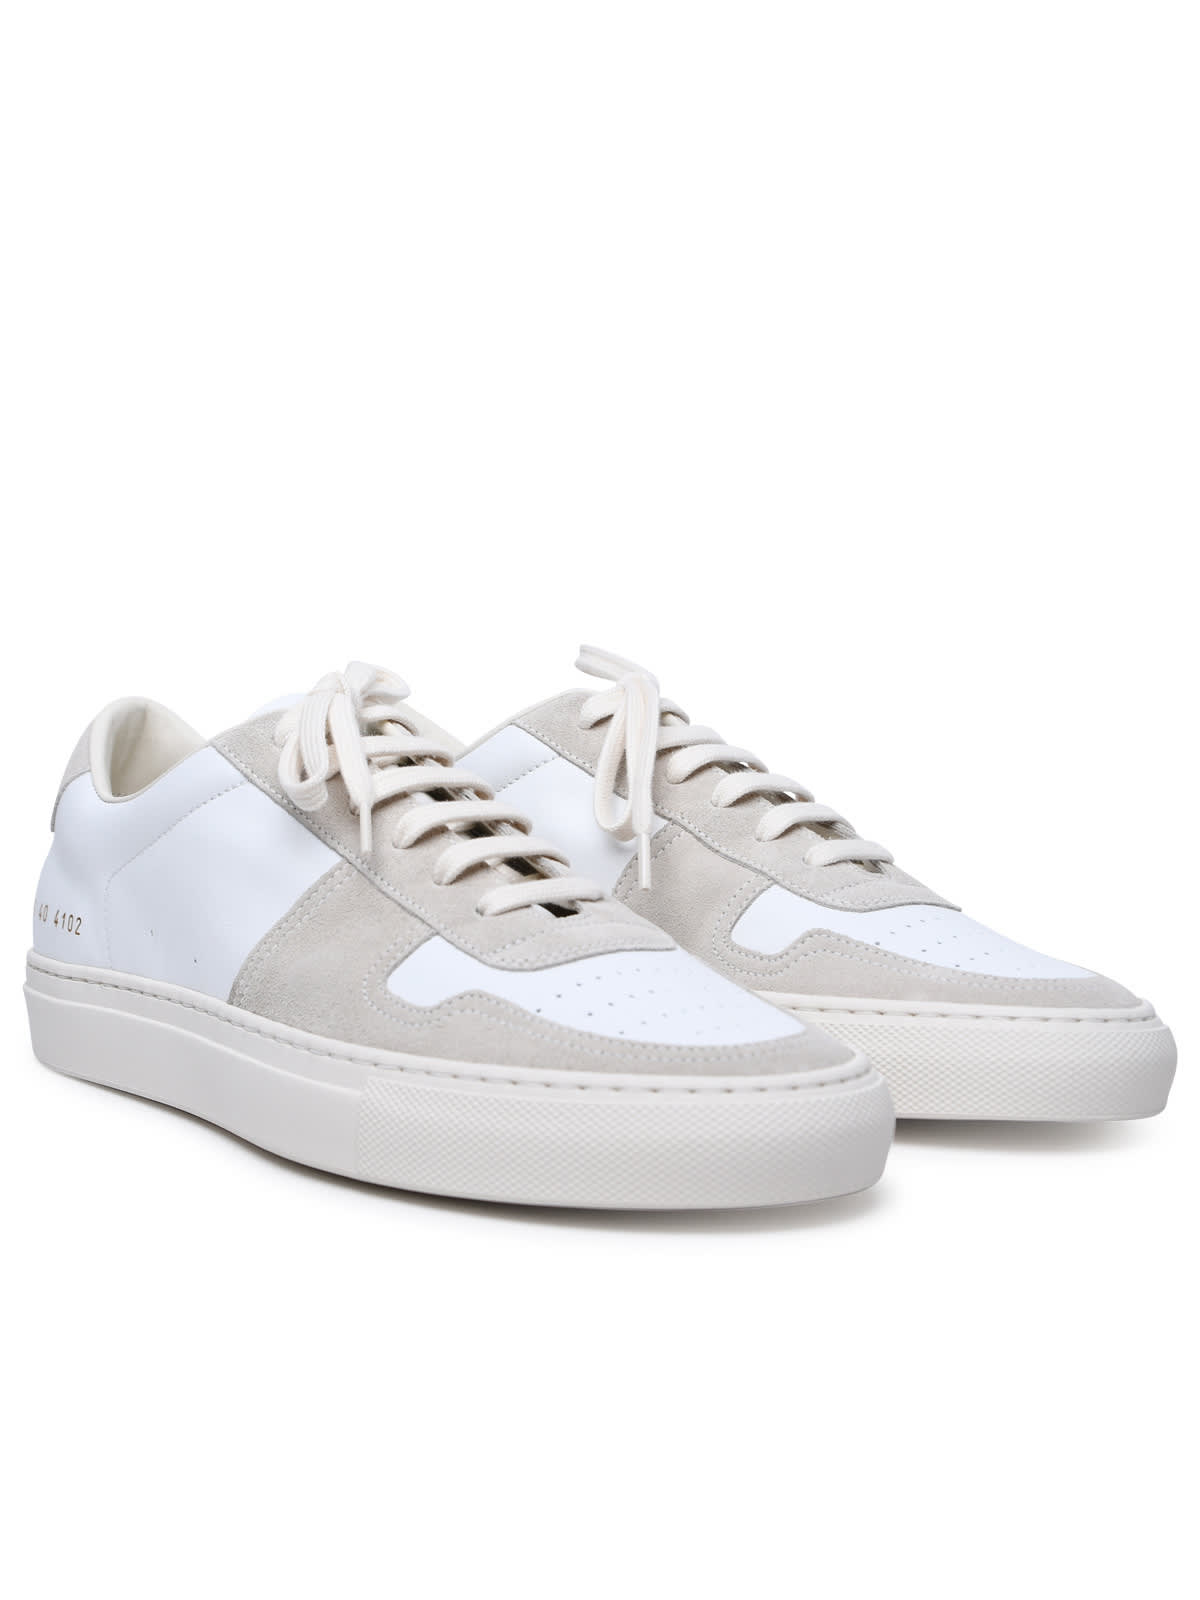 Shop Common Projects Bball Duo White Leather Sneakers